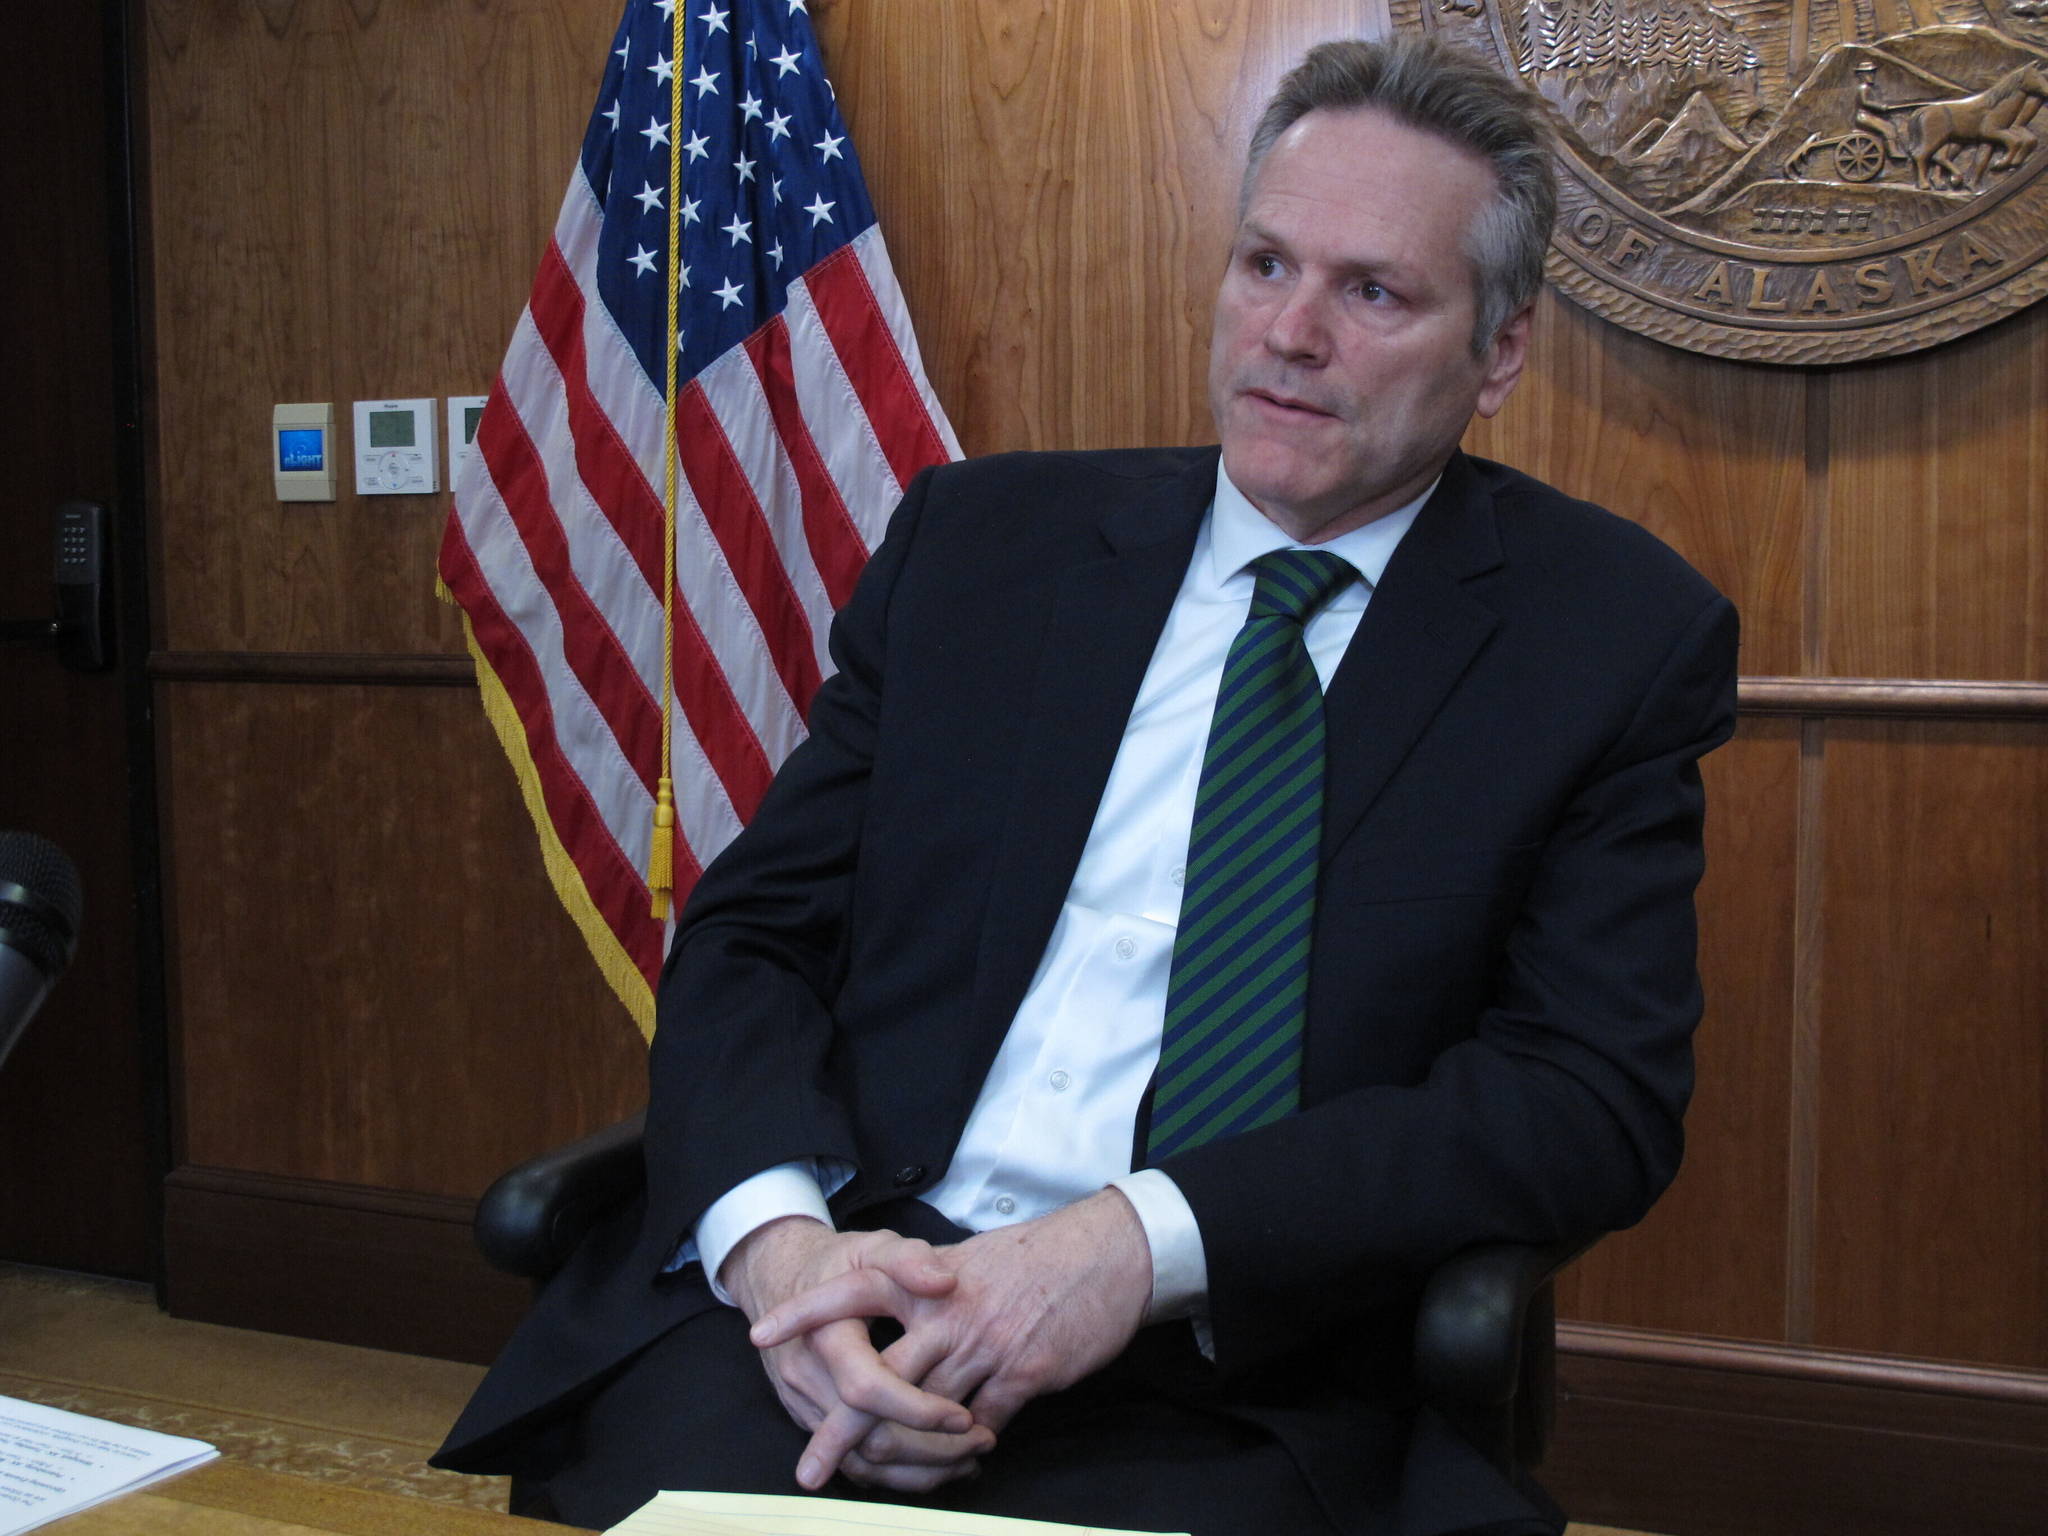 In this Jan. 31, 2020 photo, Alaska Gov. Mike Dunleavy speaks to reporters in Juneau, Alaska. On Wednesday, Feb. 12, Dunleavy proposed a state lottery as a way to provide a new source of revenue. (AP Photo/Becky Bohrer)